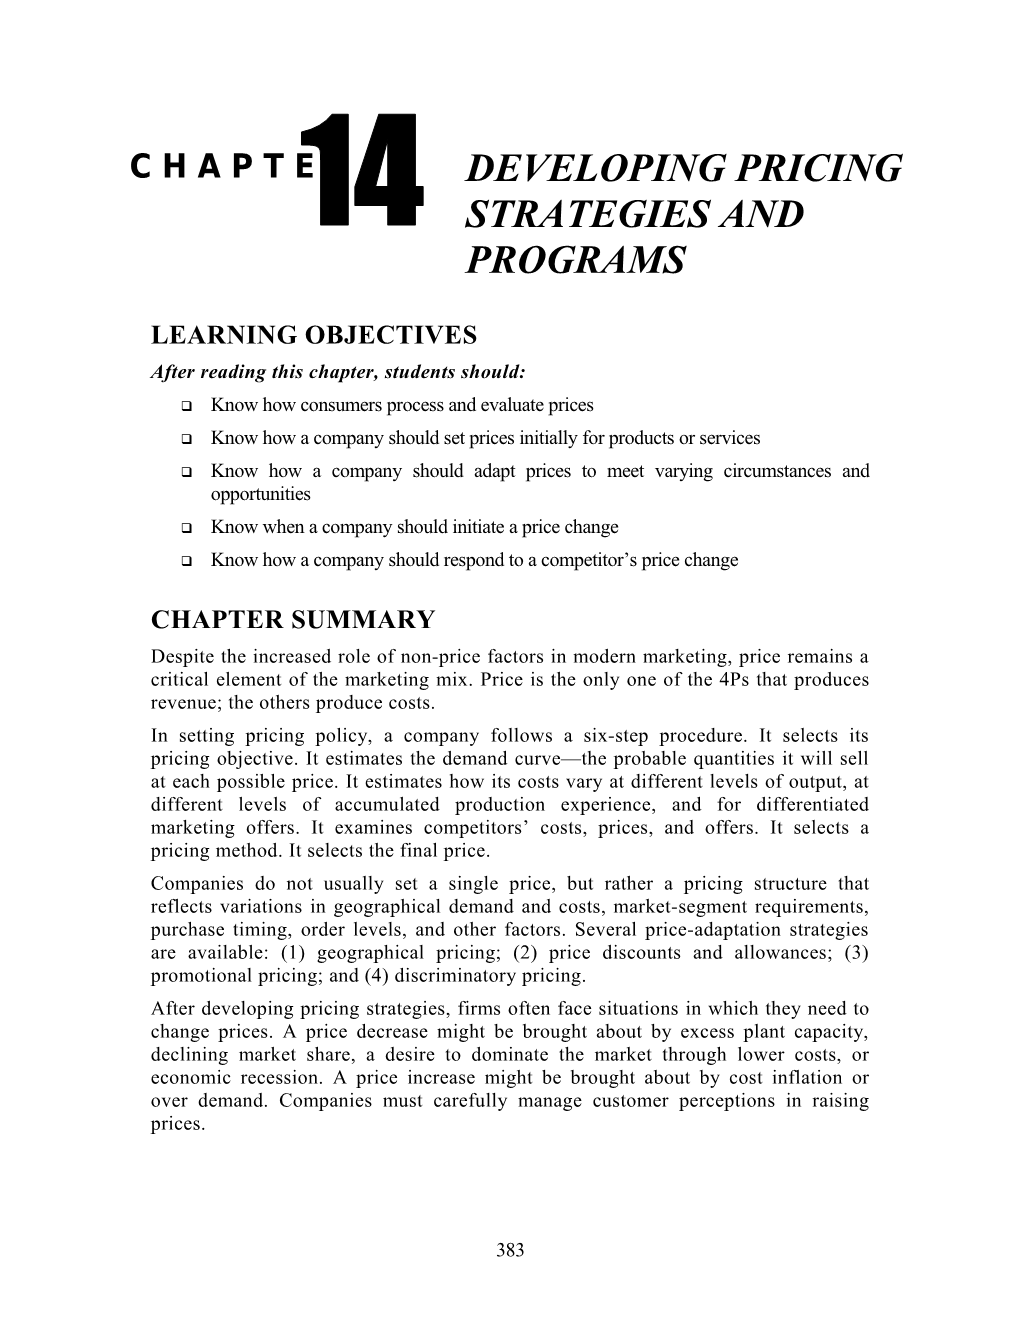 Chapter 14: Developing Pricing Strategies and Programs